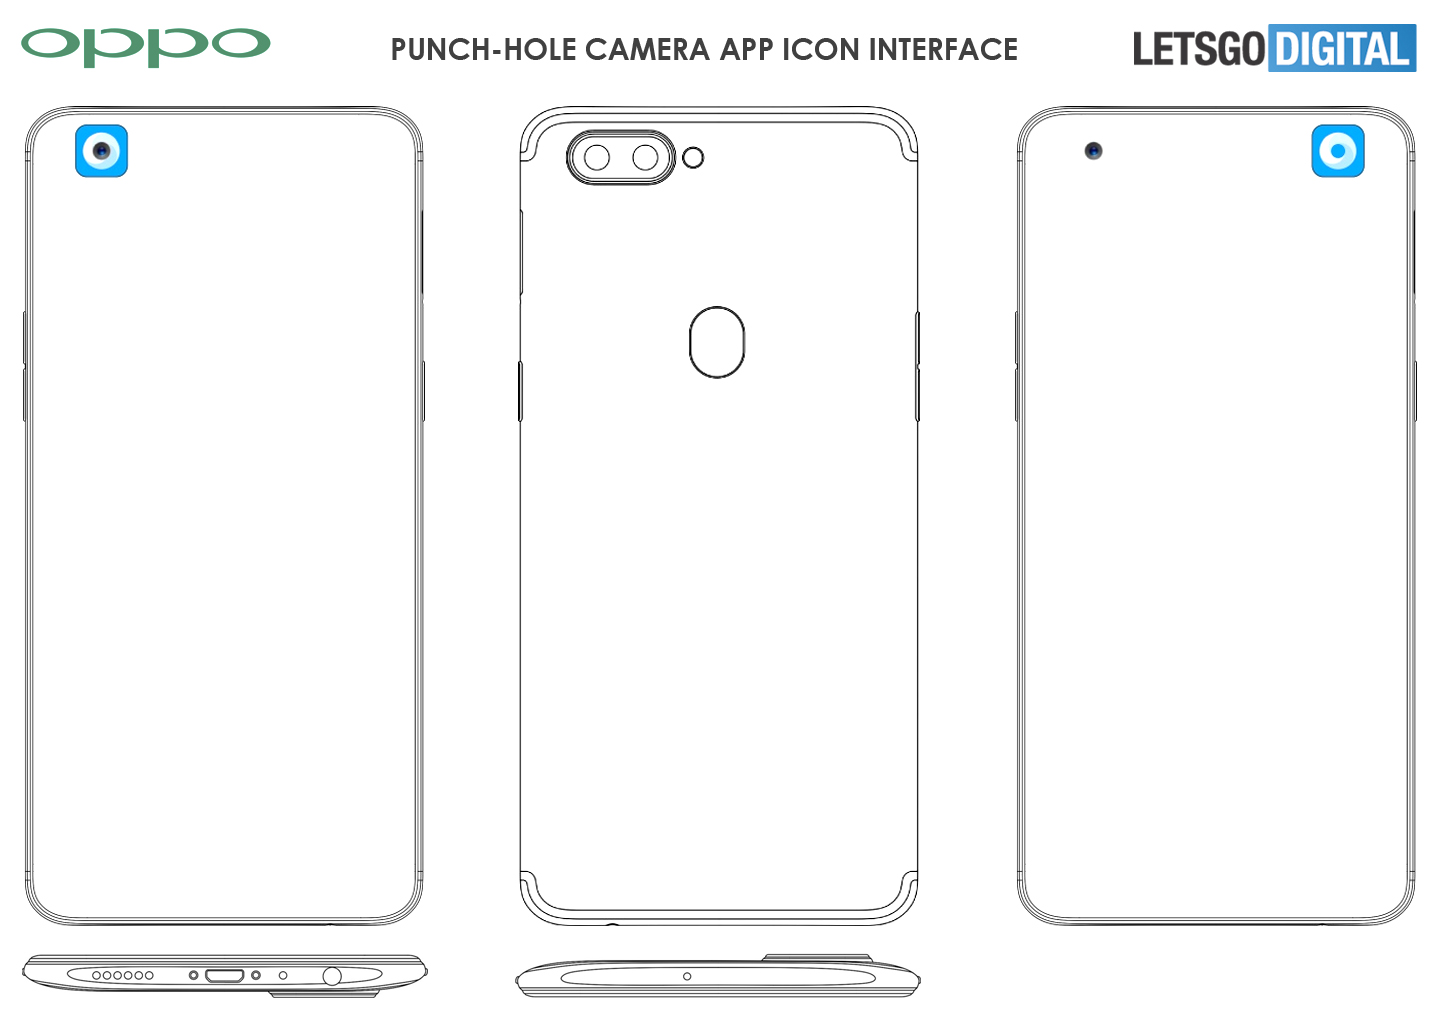 Oppo punch-hole camera